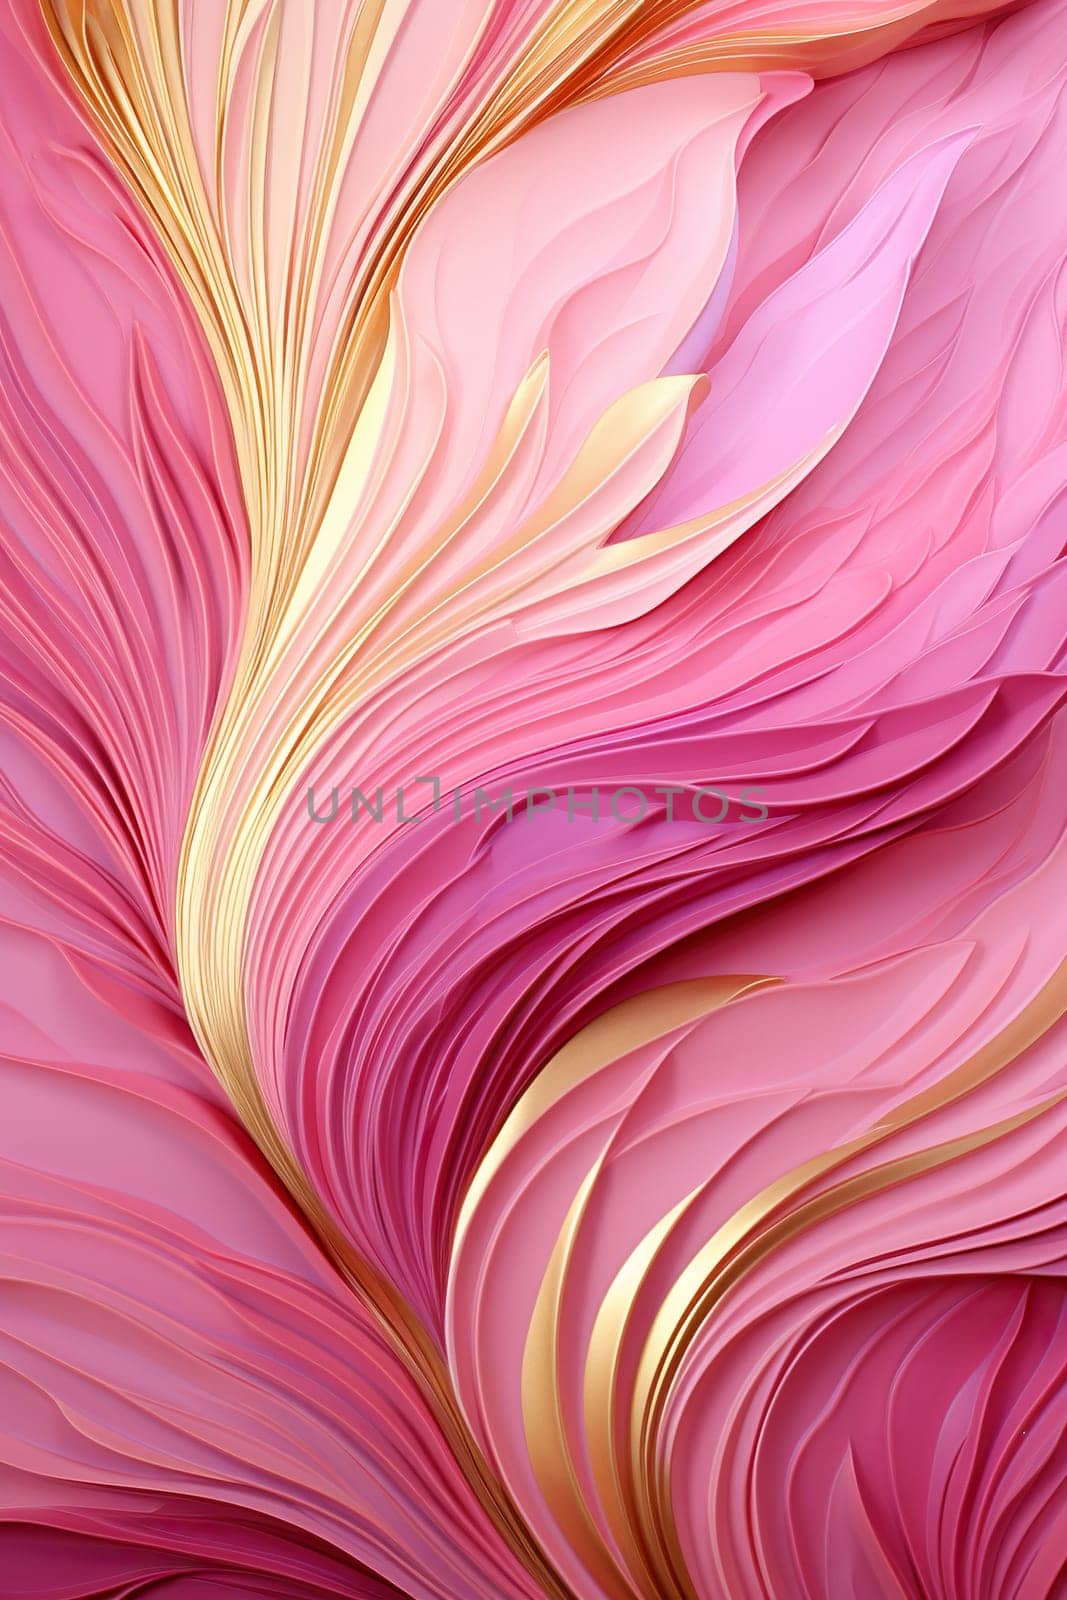 Vertical background with pink and gold feather pattern.